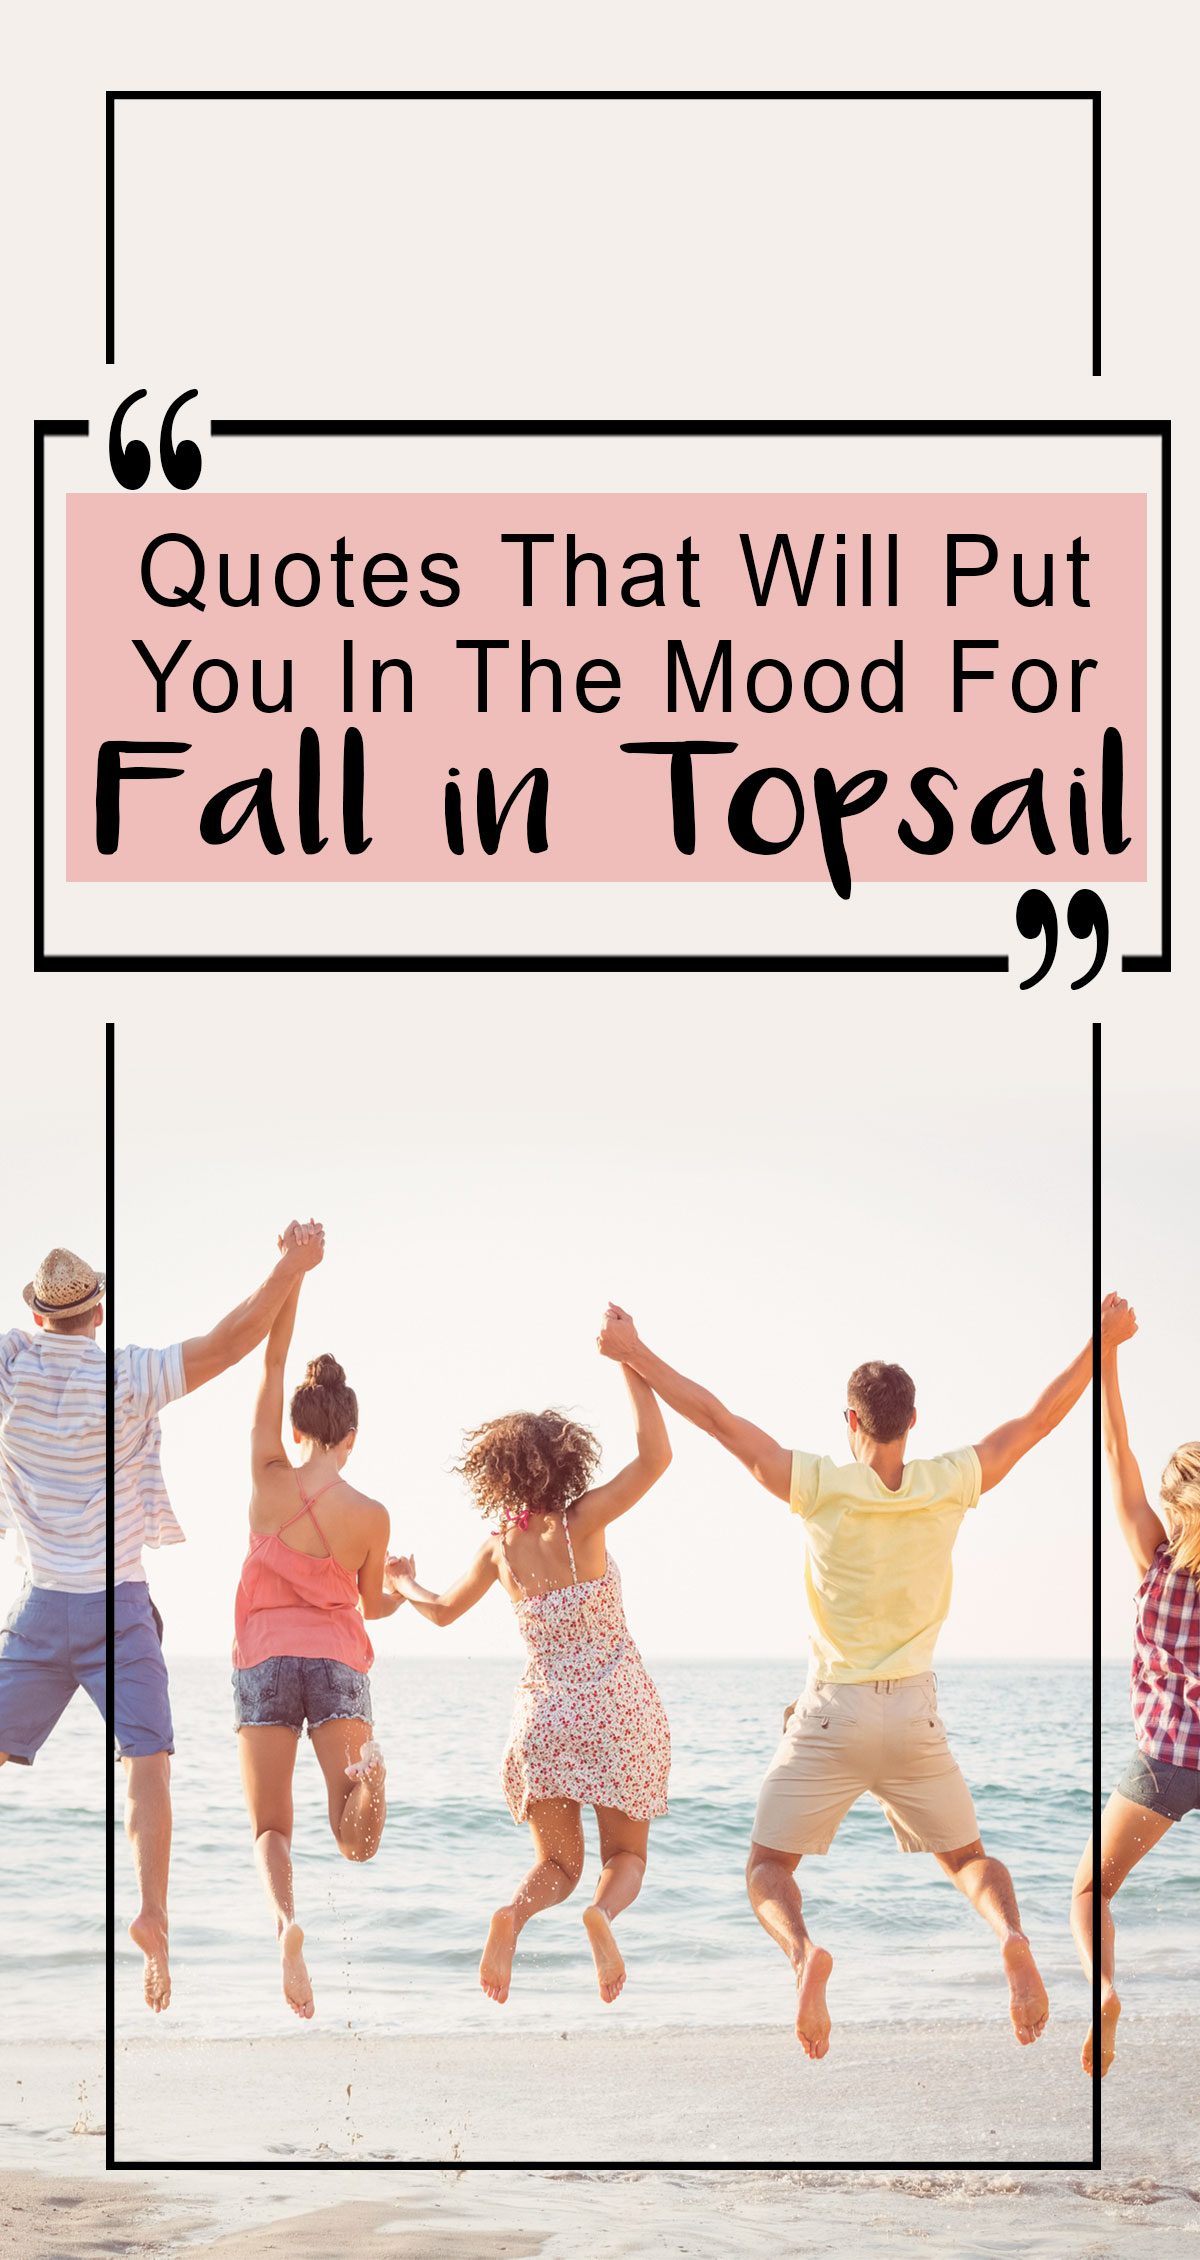 Quotes That Will Put You in the Mood for Fall at Topsail Pin